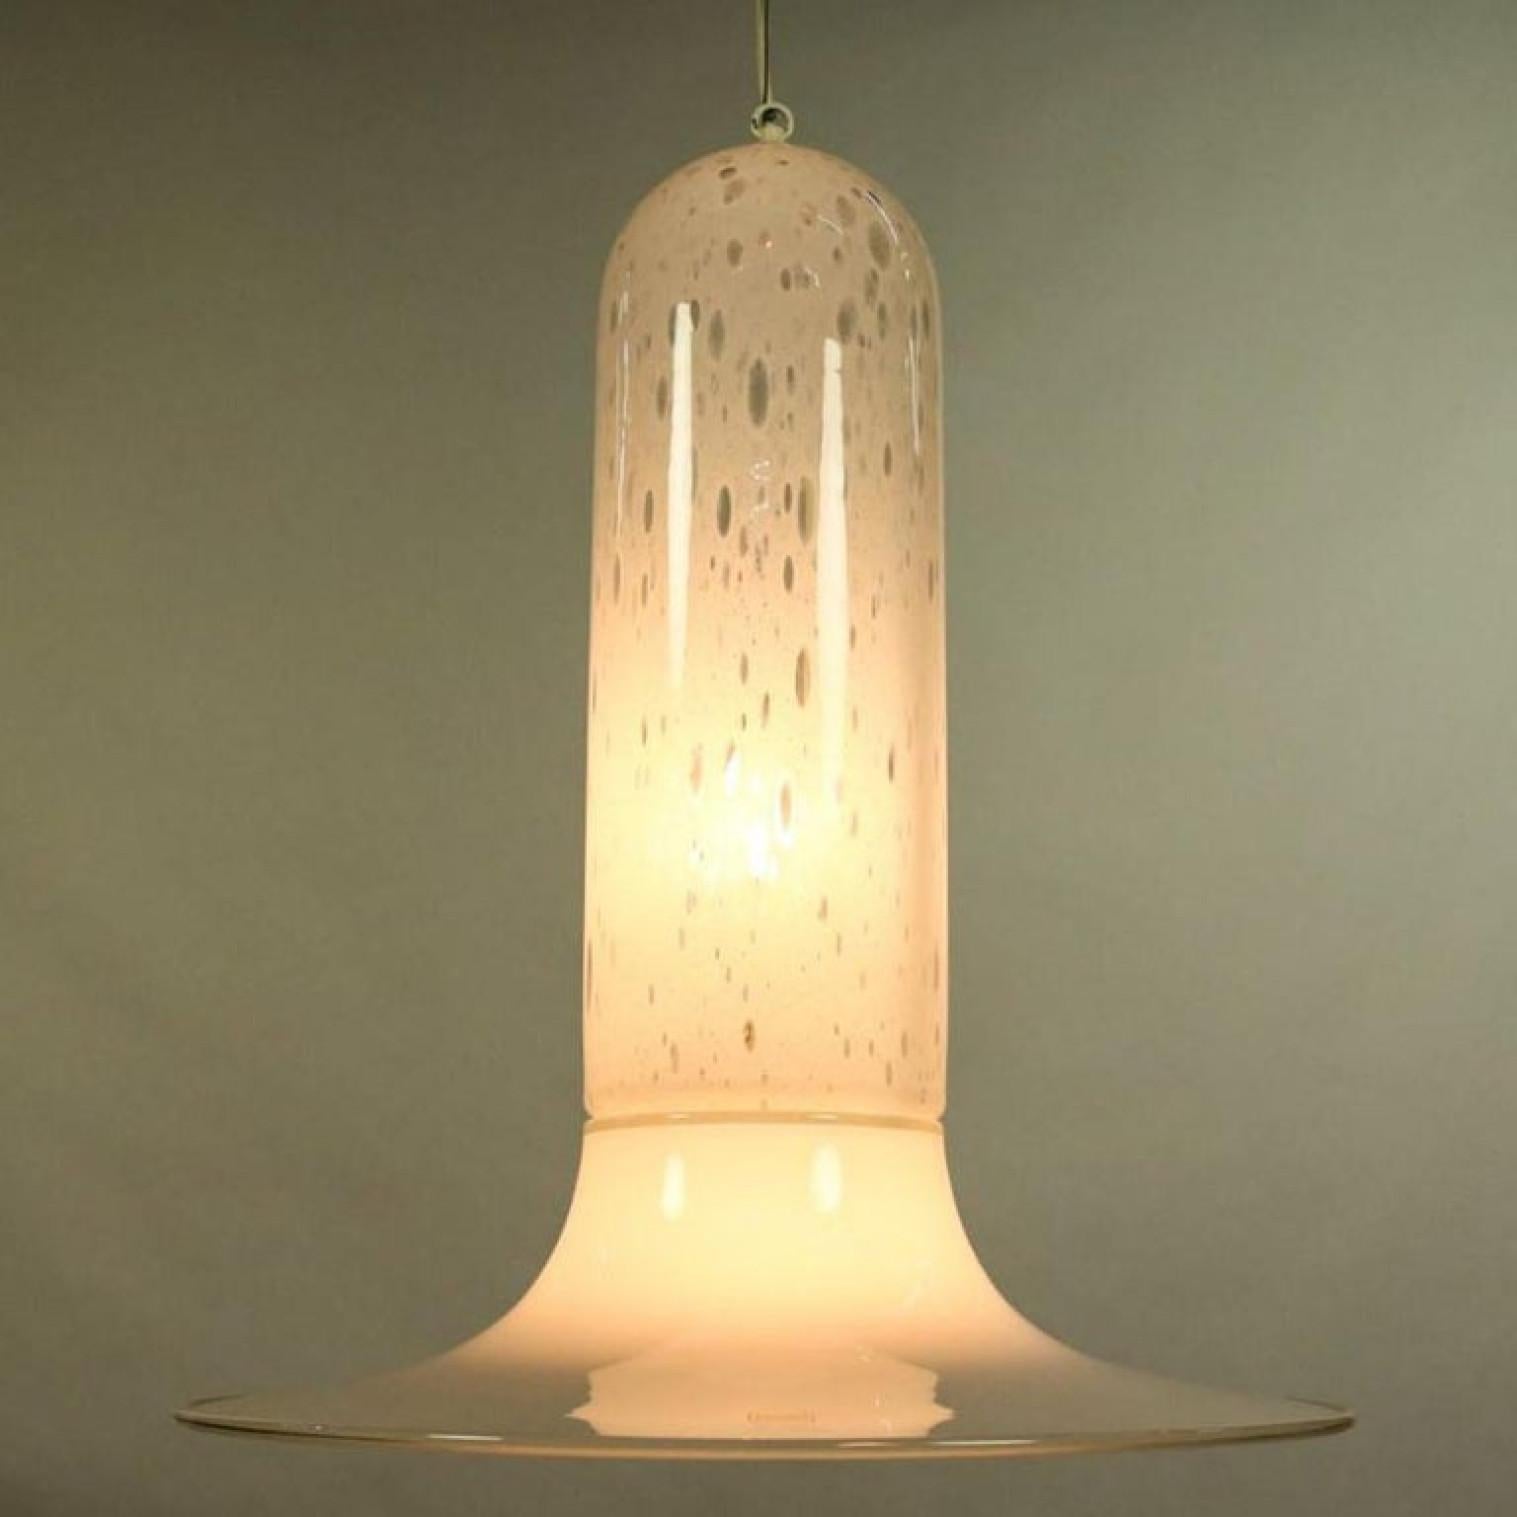 1 of the 2 Murano Glass Pendant Lamp by Barbini, 1970s For Sale 7